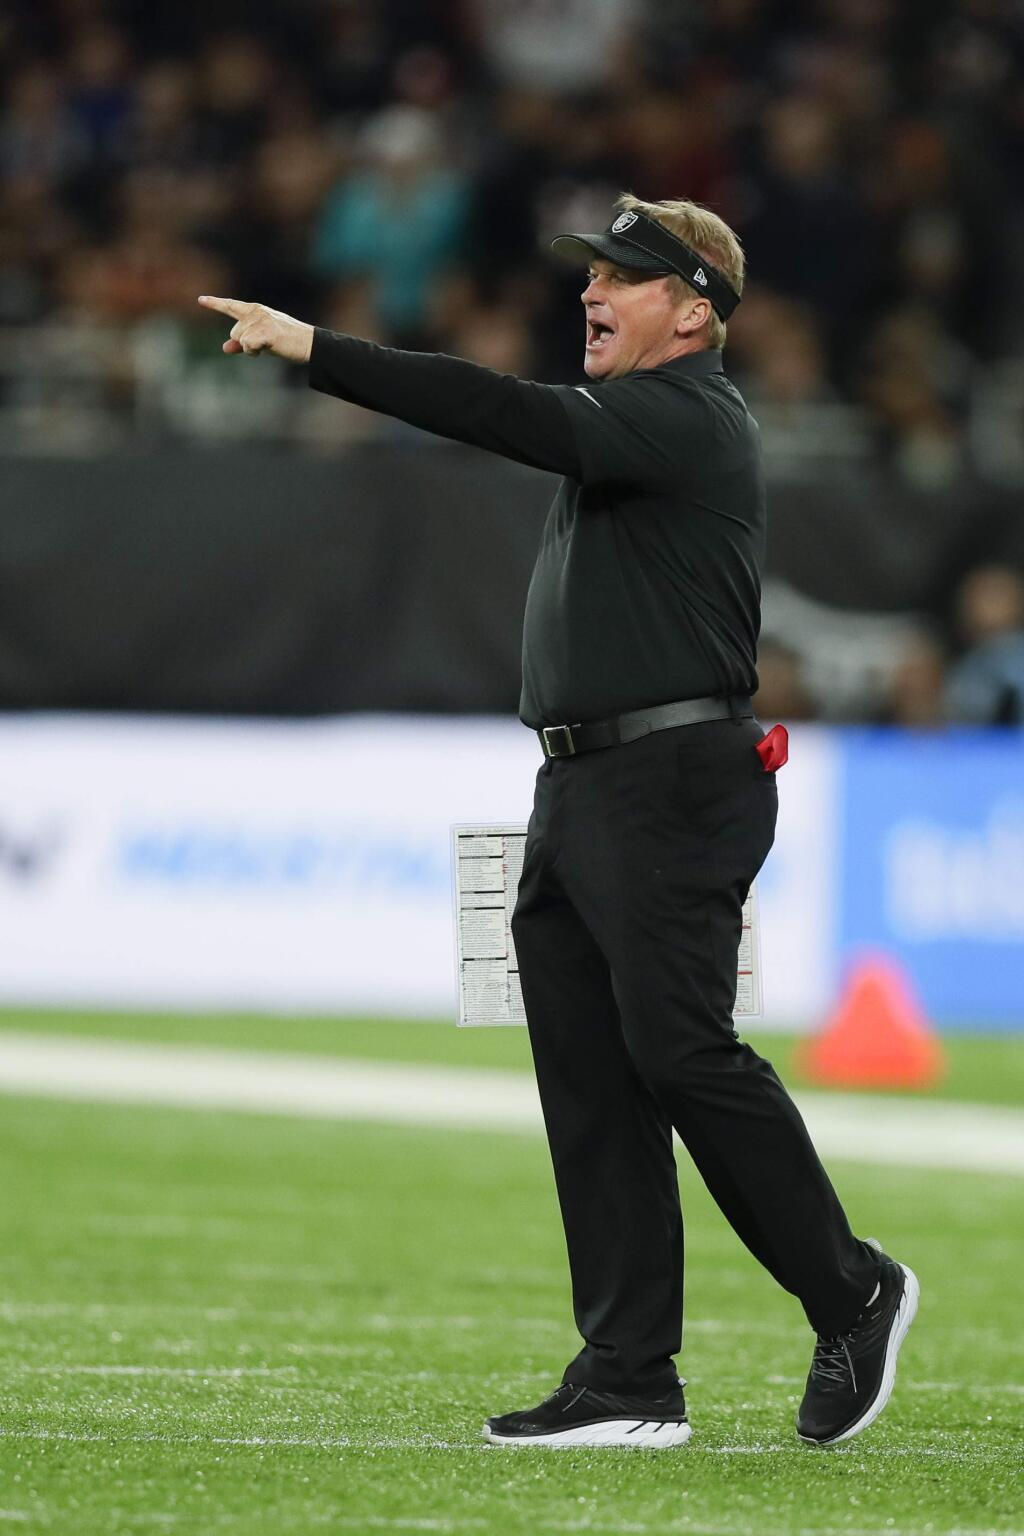 Oakland Raiders head coach Jon Gruden shouts during the first half of an NFL football game against the Chicago Bears at Tottenham Hotspur Stadium, Sunday, Oct. 6, 2019, in London. (AP Photo/Kirsty Wigglesworth)